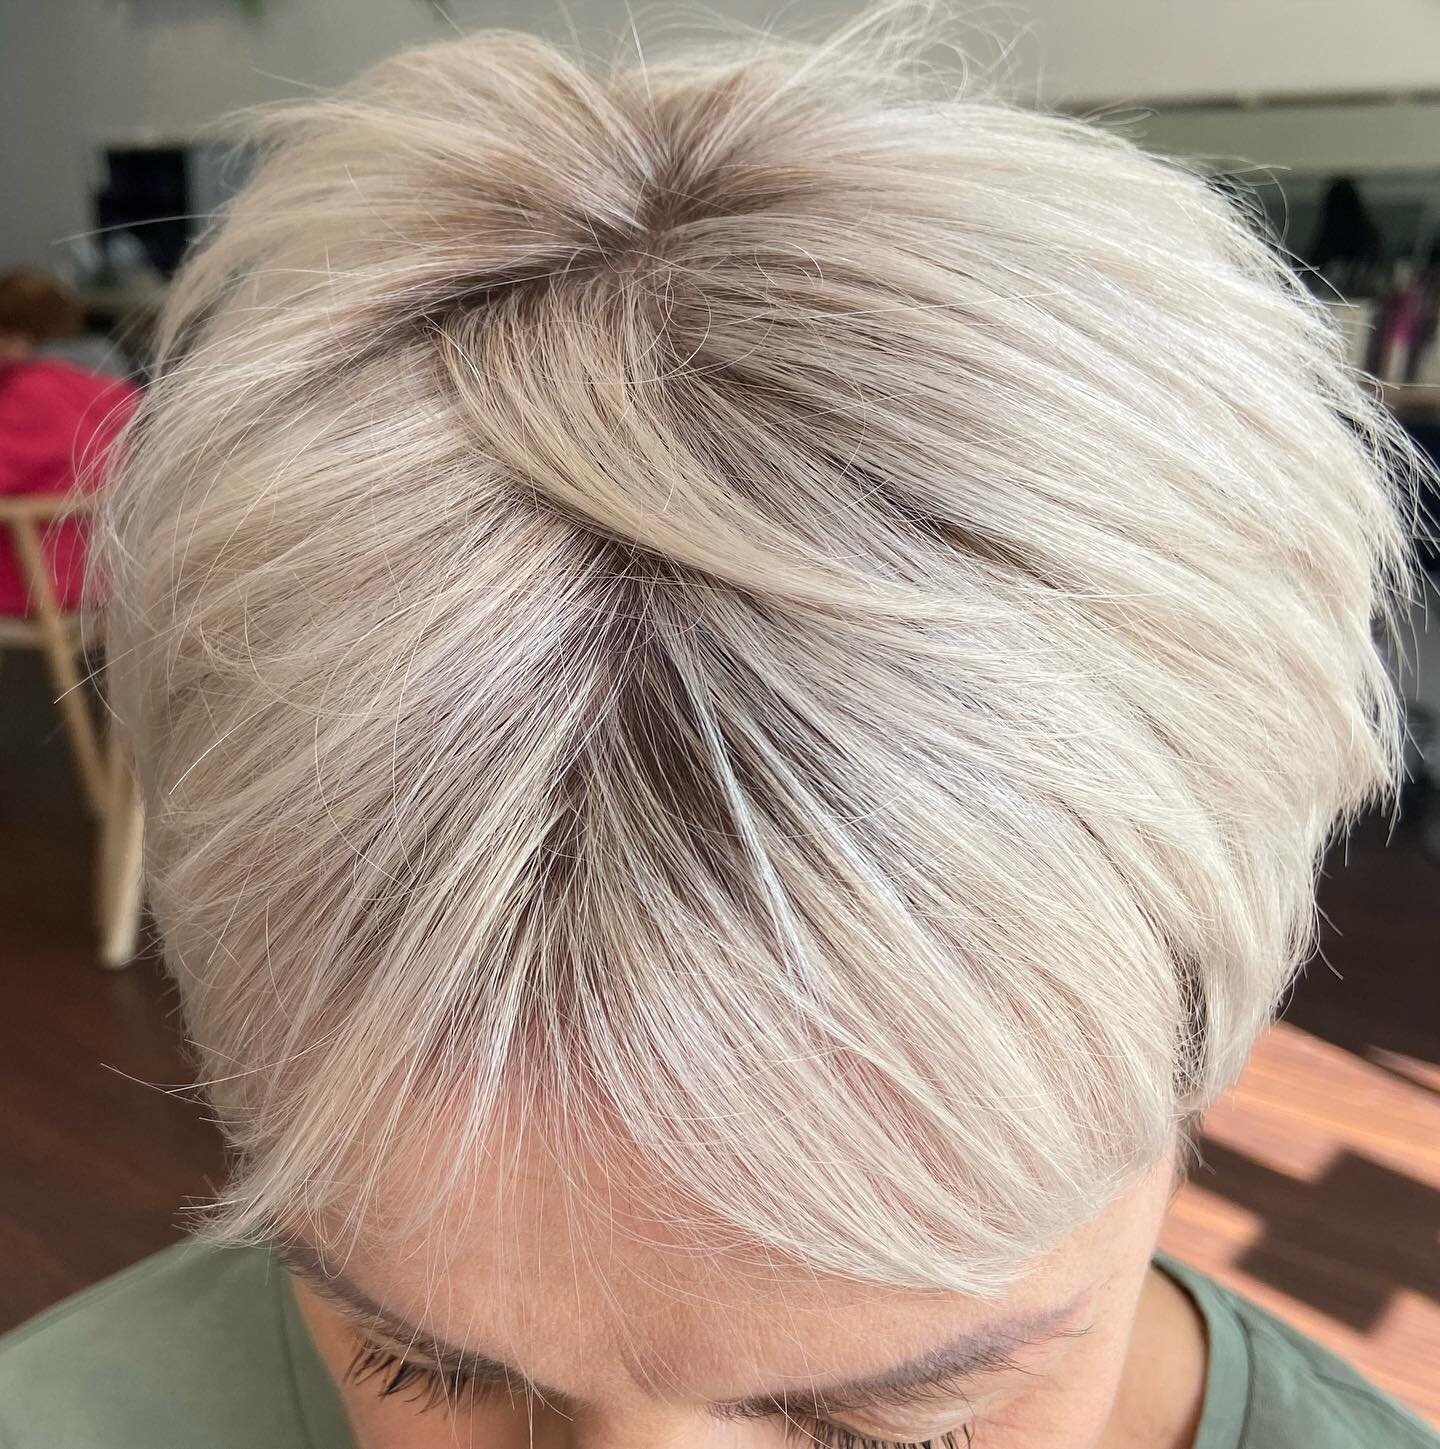 CAPPED HIGHLIGHTS- Who remembers the highlighting cap? Well we&rsquo;ve brought it back. Remove the cost of time and foils from your service and achieve beautiful natural traditional looking highlights and less time in the chair. So if you are lookin